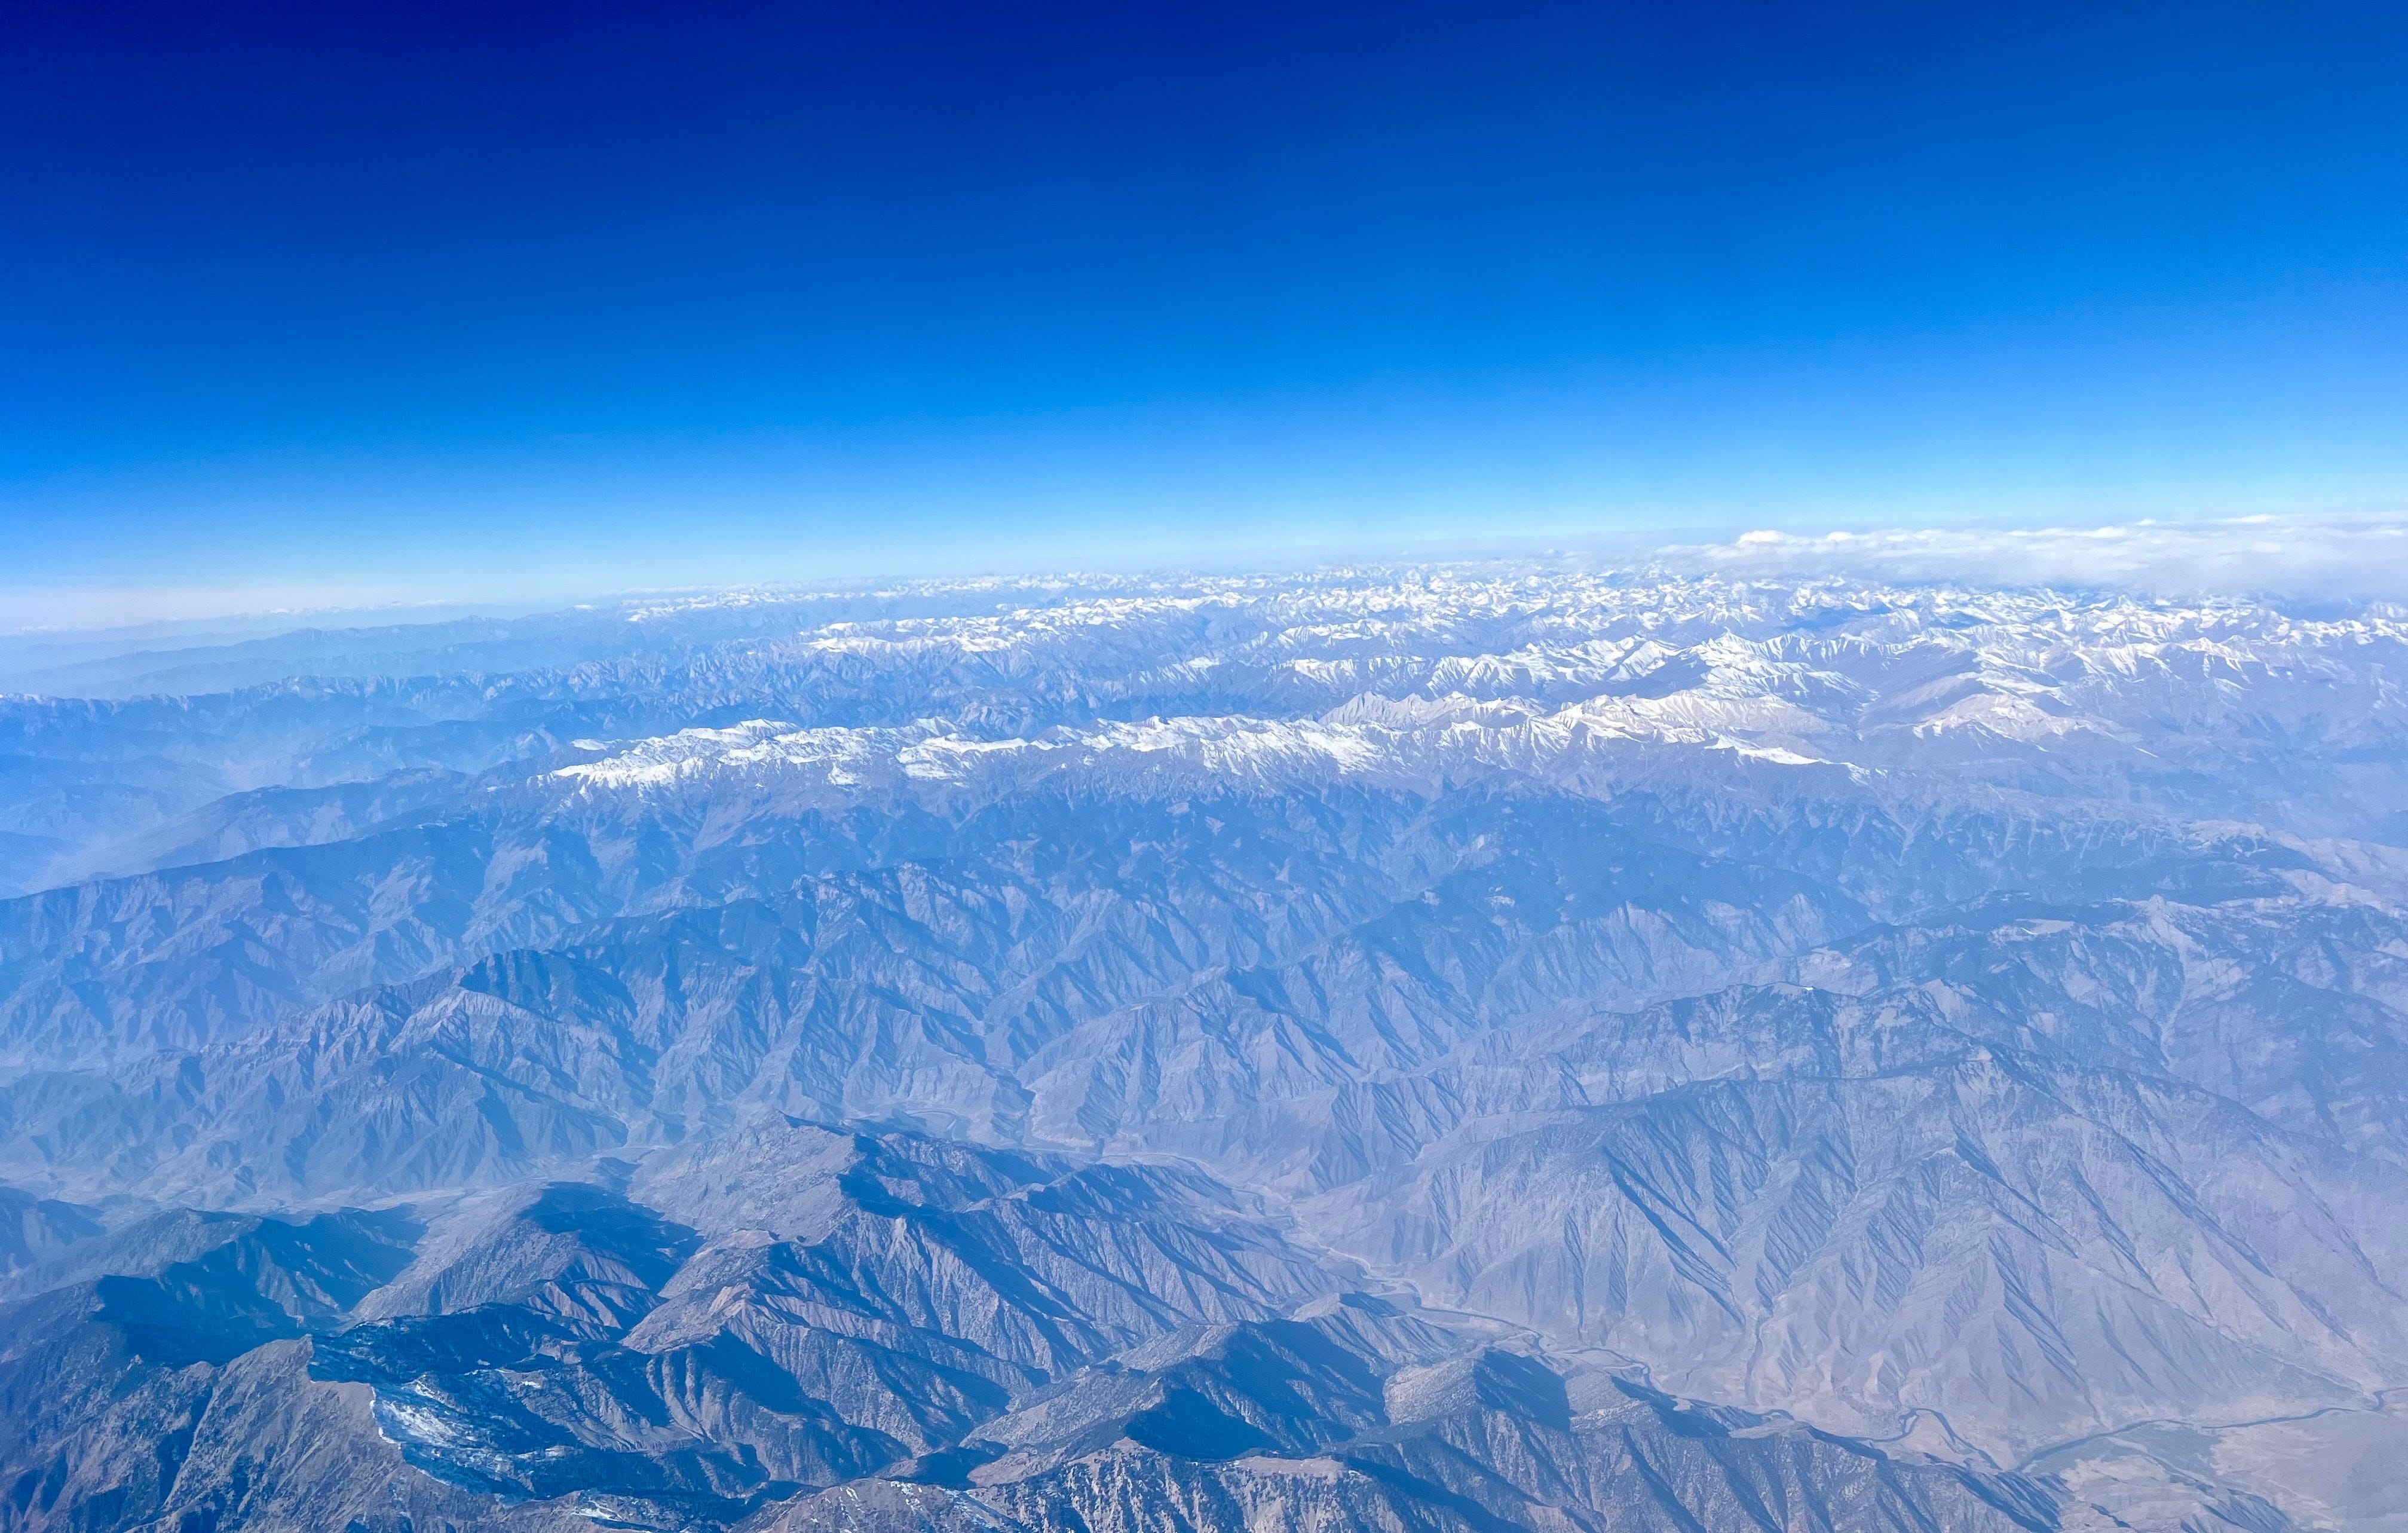 <p>The downfall of an aisle seat is missing the views out of the plane windows, but luckily, other travelers are willing to share their space for views like this.</p>